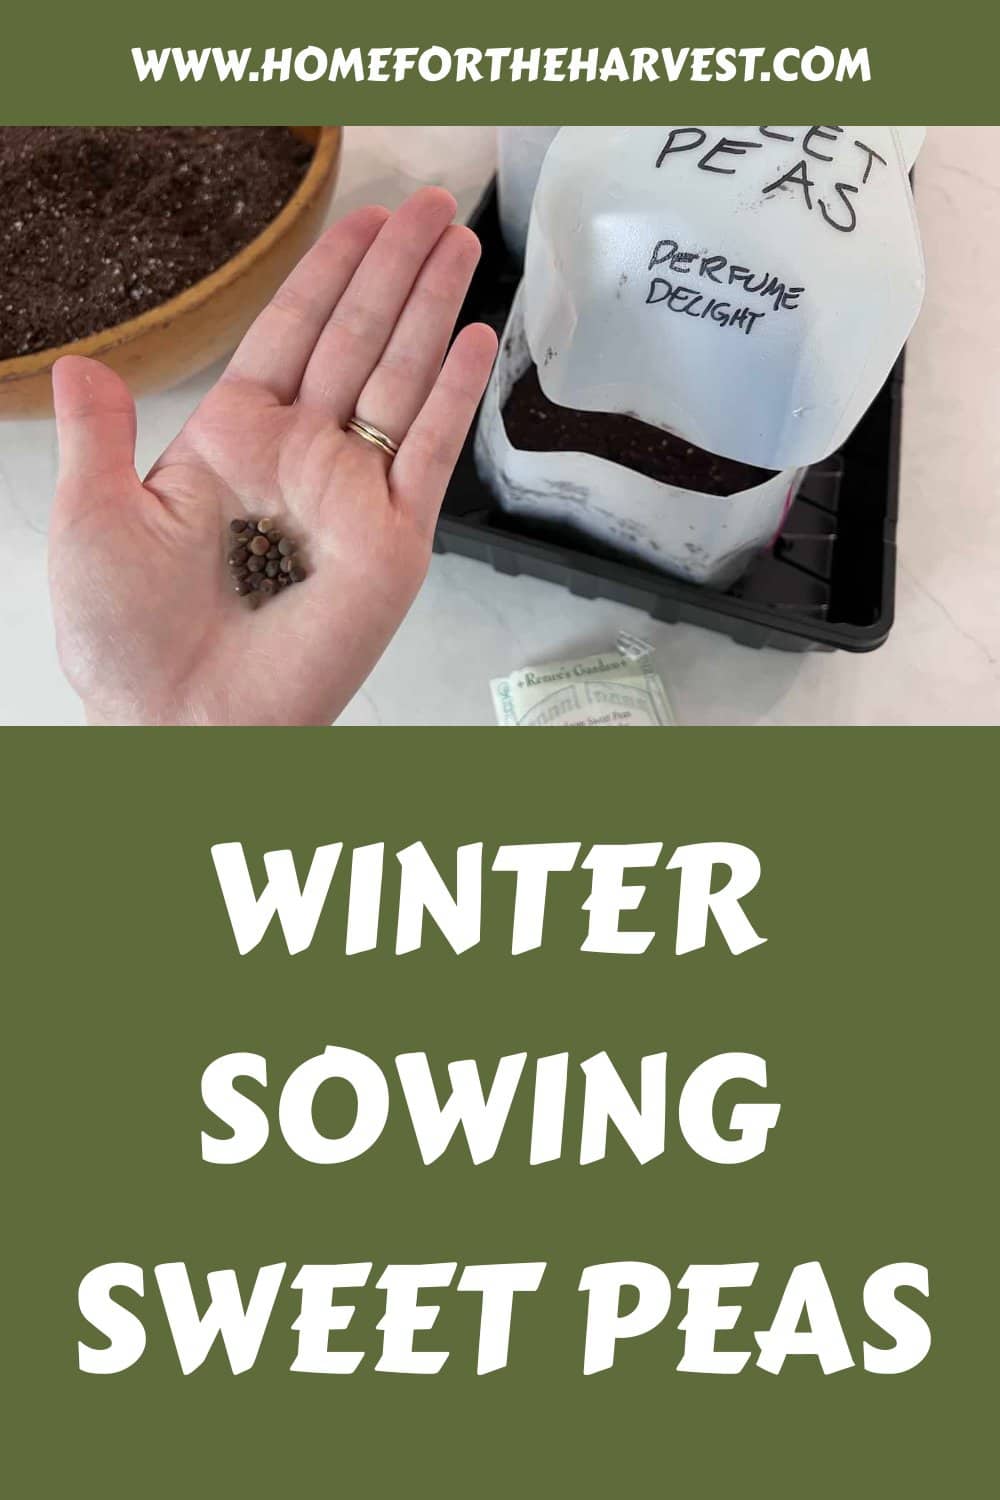 Winter sowing sweet peas generated pin 53969